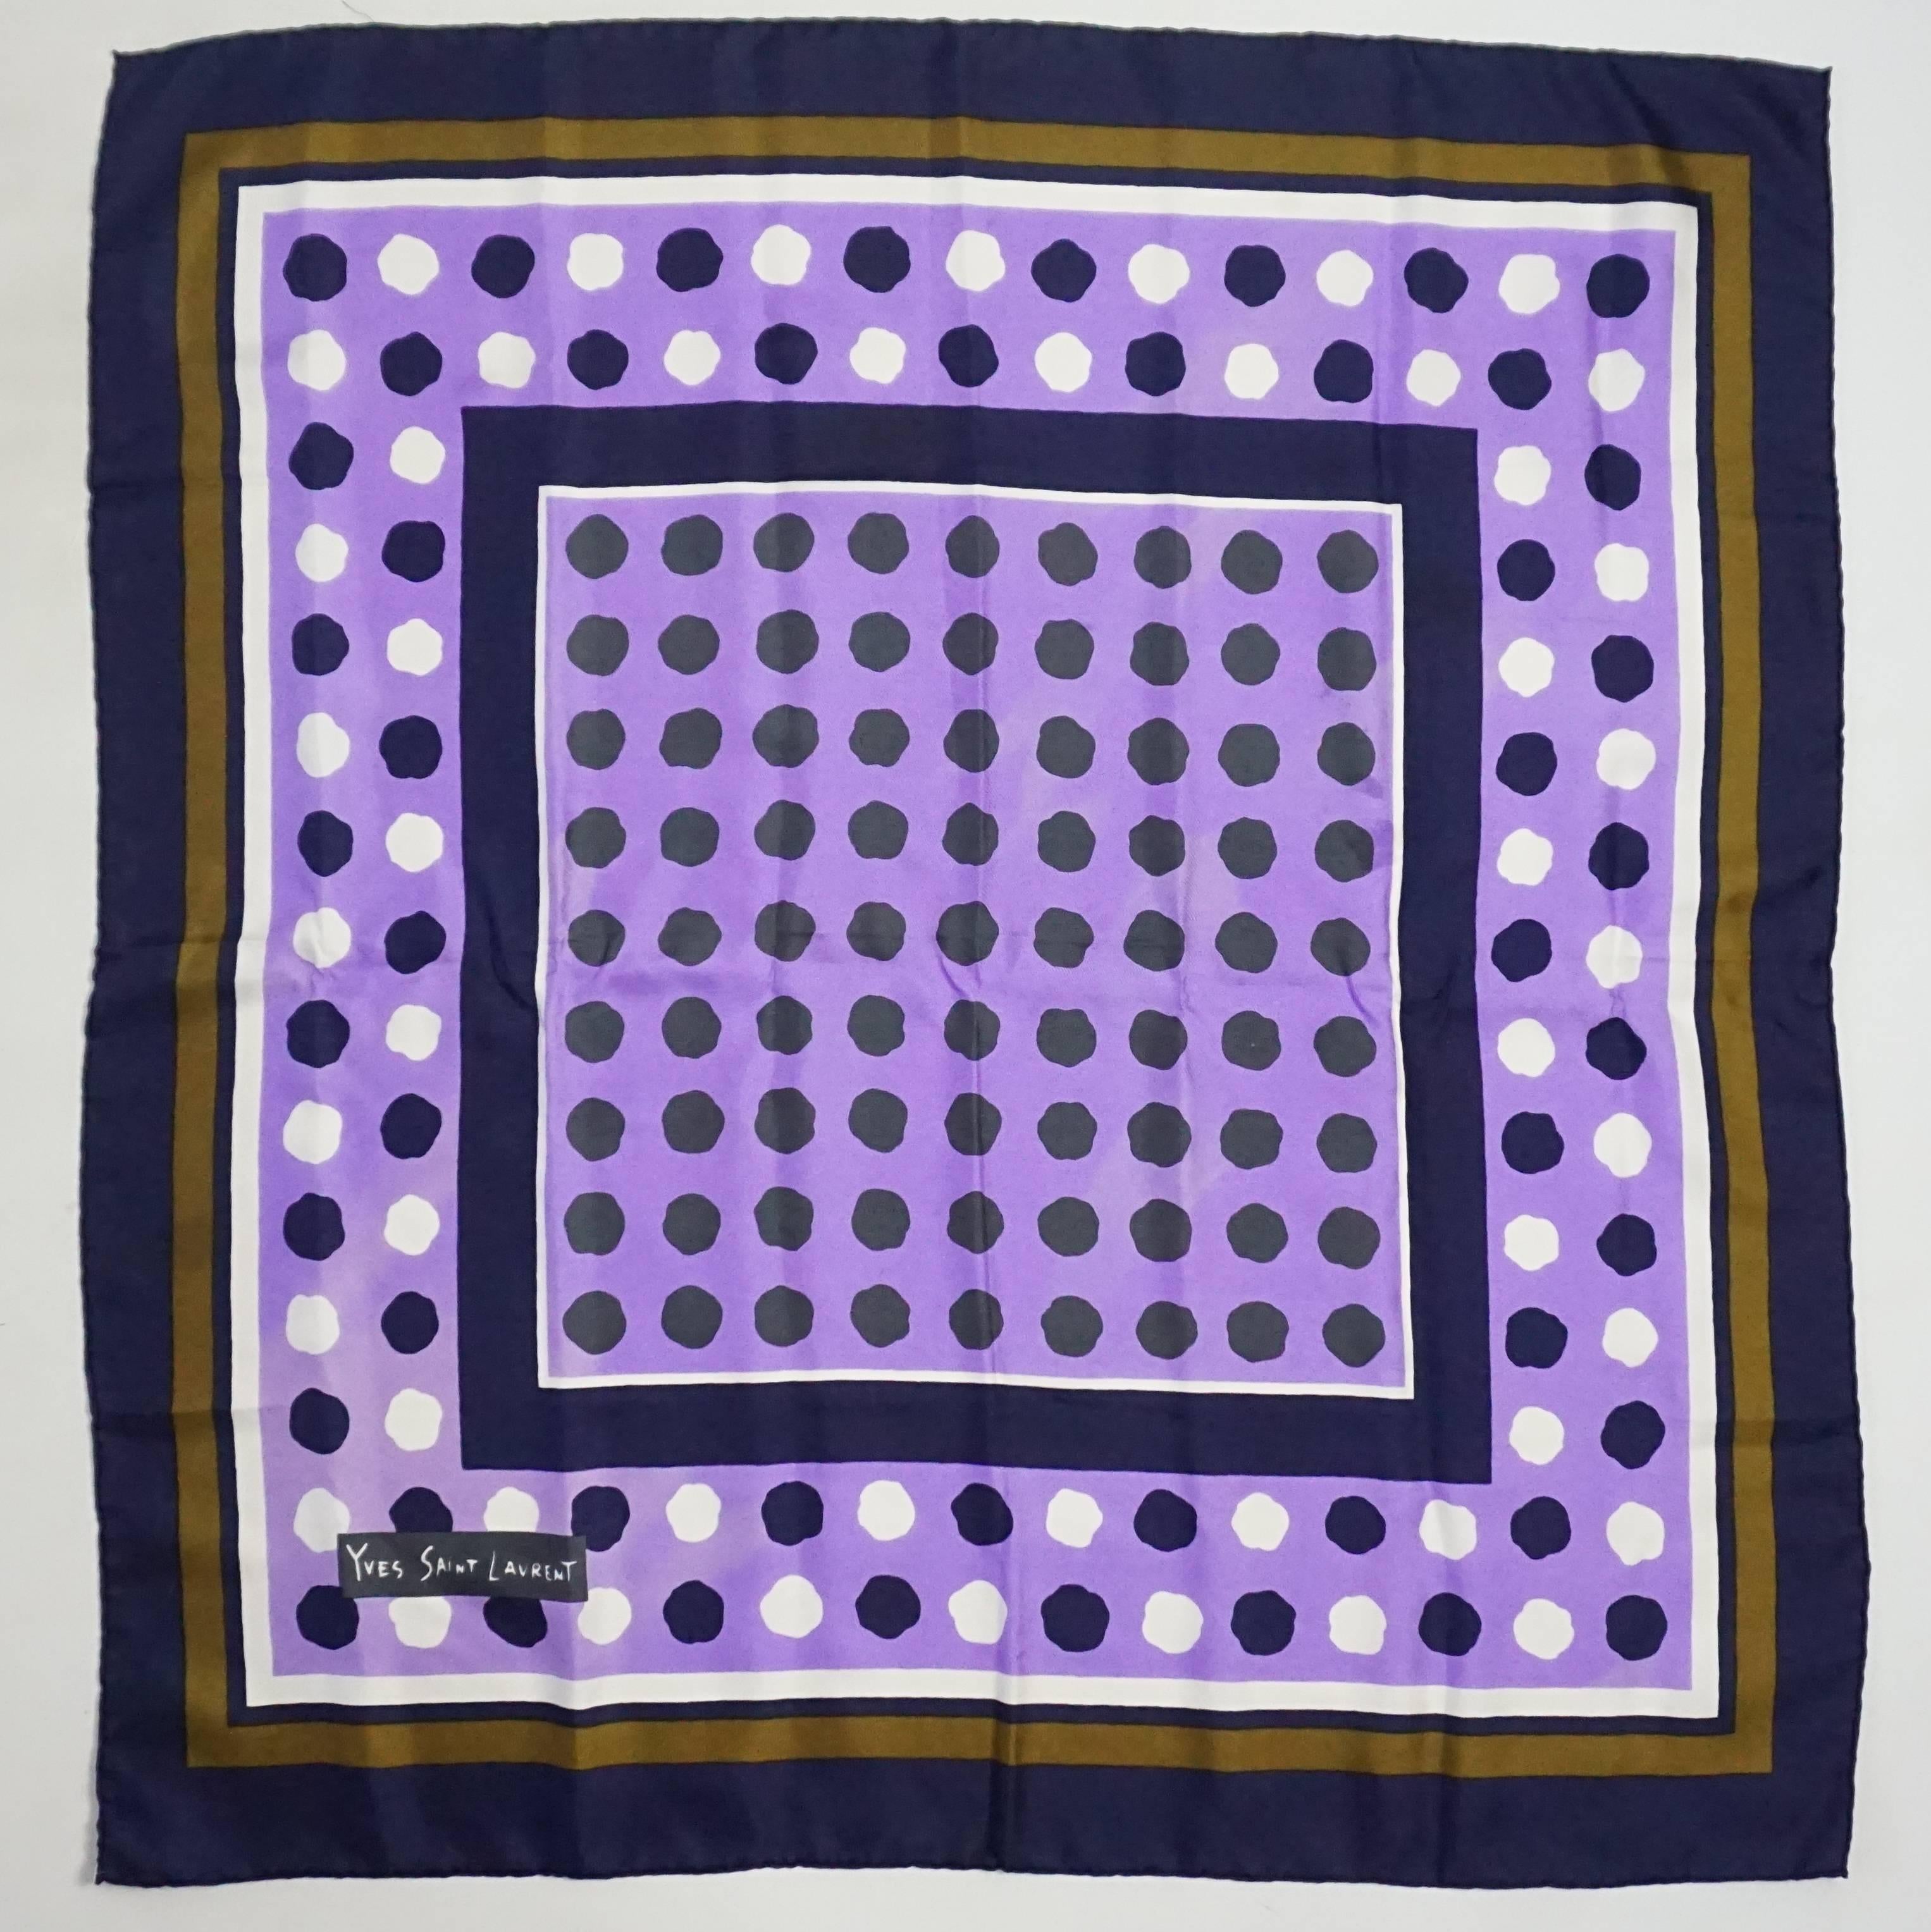 This YSL scarf is lavender, navy, white, and tan. The scarf is made of silk and has polka dots all over with squares around them. It is in good condition with  minimal staining and discolorations as seen in the last images. 

Measurements
Height: